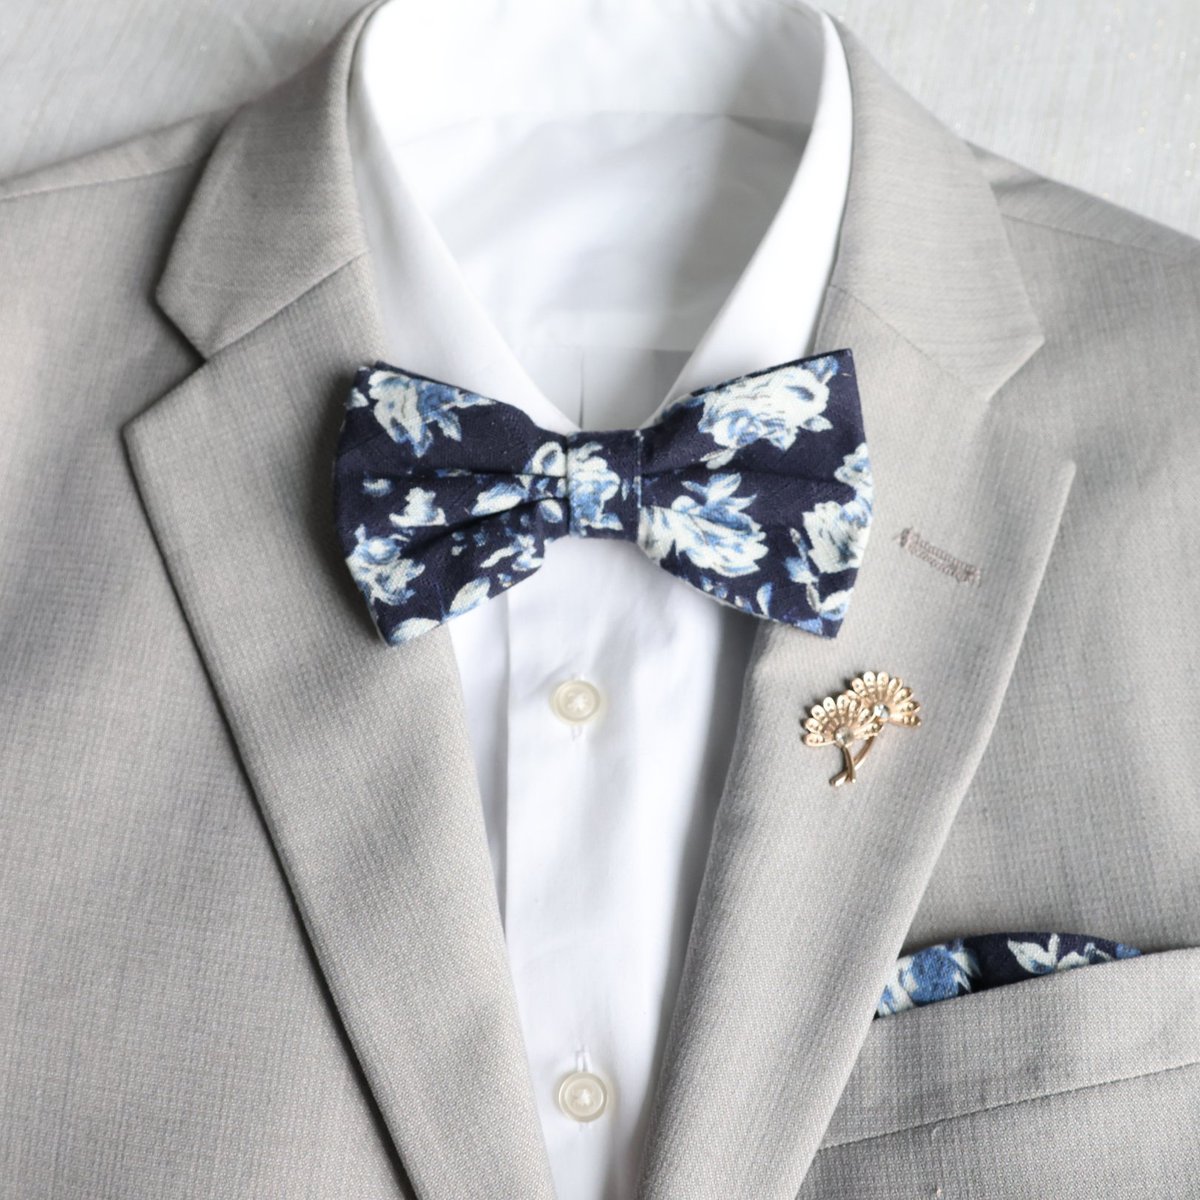 Petals and patterns – a floral bow tie for those who embrace the beauty of details. #bowtie #bowties #weddingtie #weddingties #bluebowtie #bluebowties #groomsmentie #groomstie #menswear #mensfashion #portlandwedding #portlandweddings #groomsmenstyle #groomsmenoutfit #bluewedding